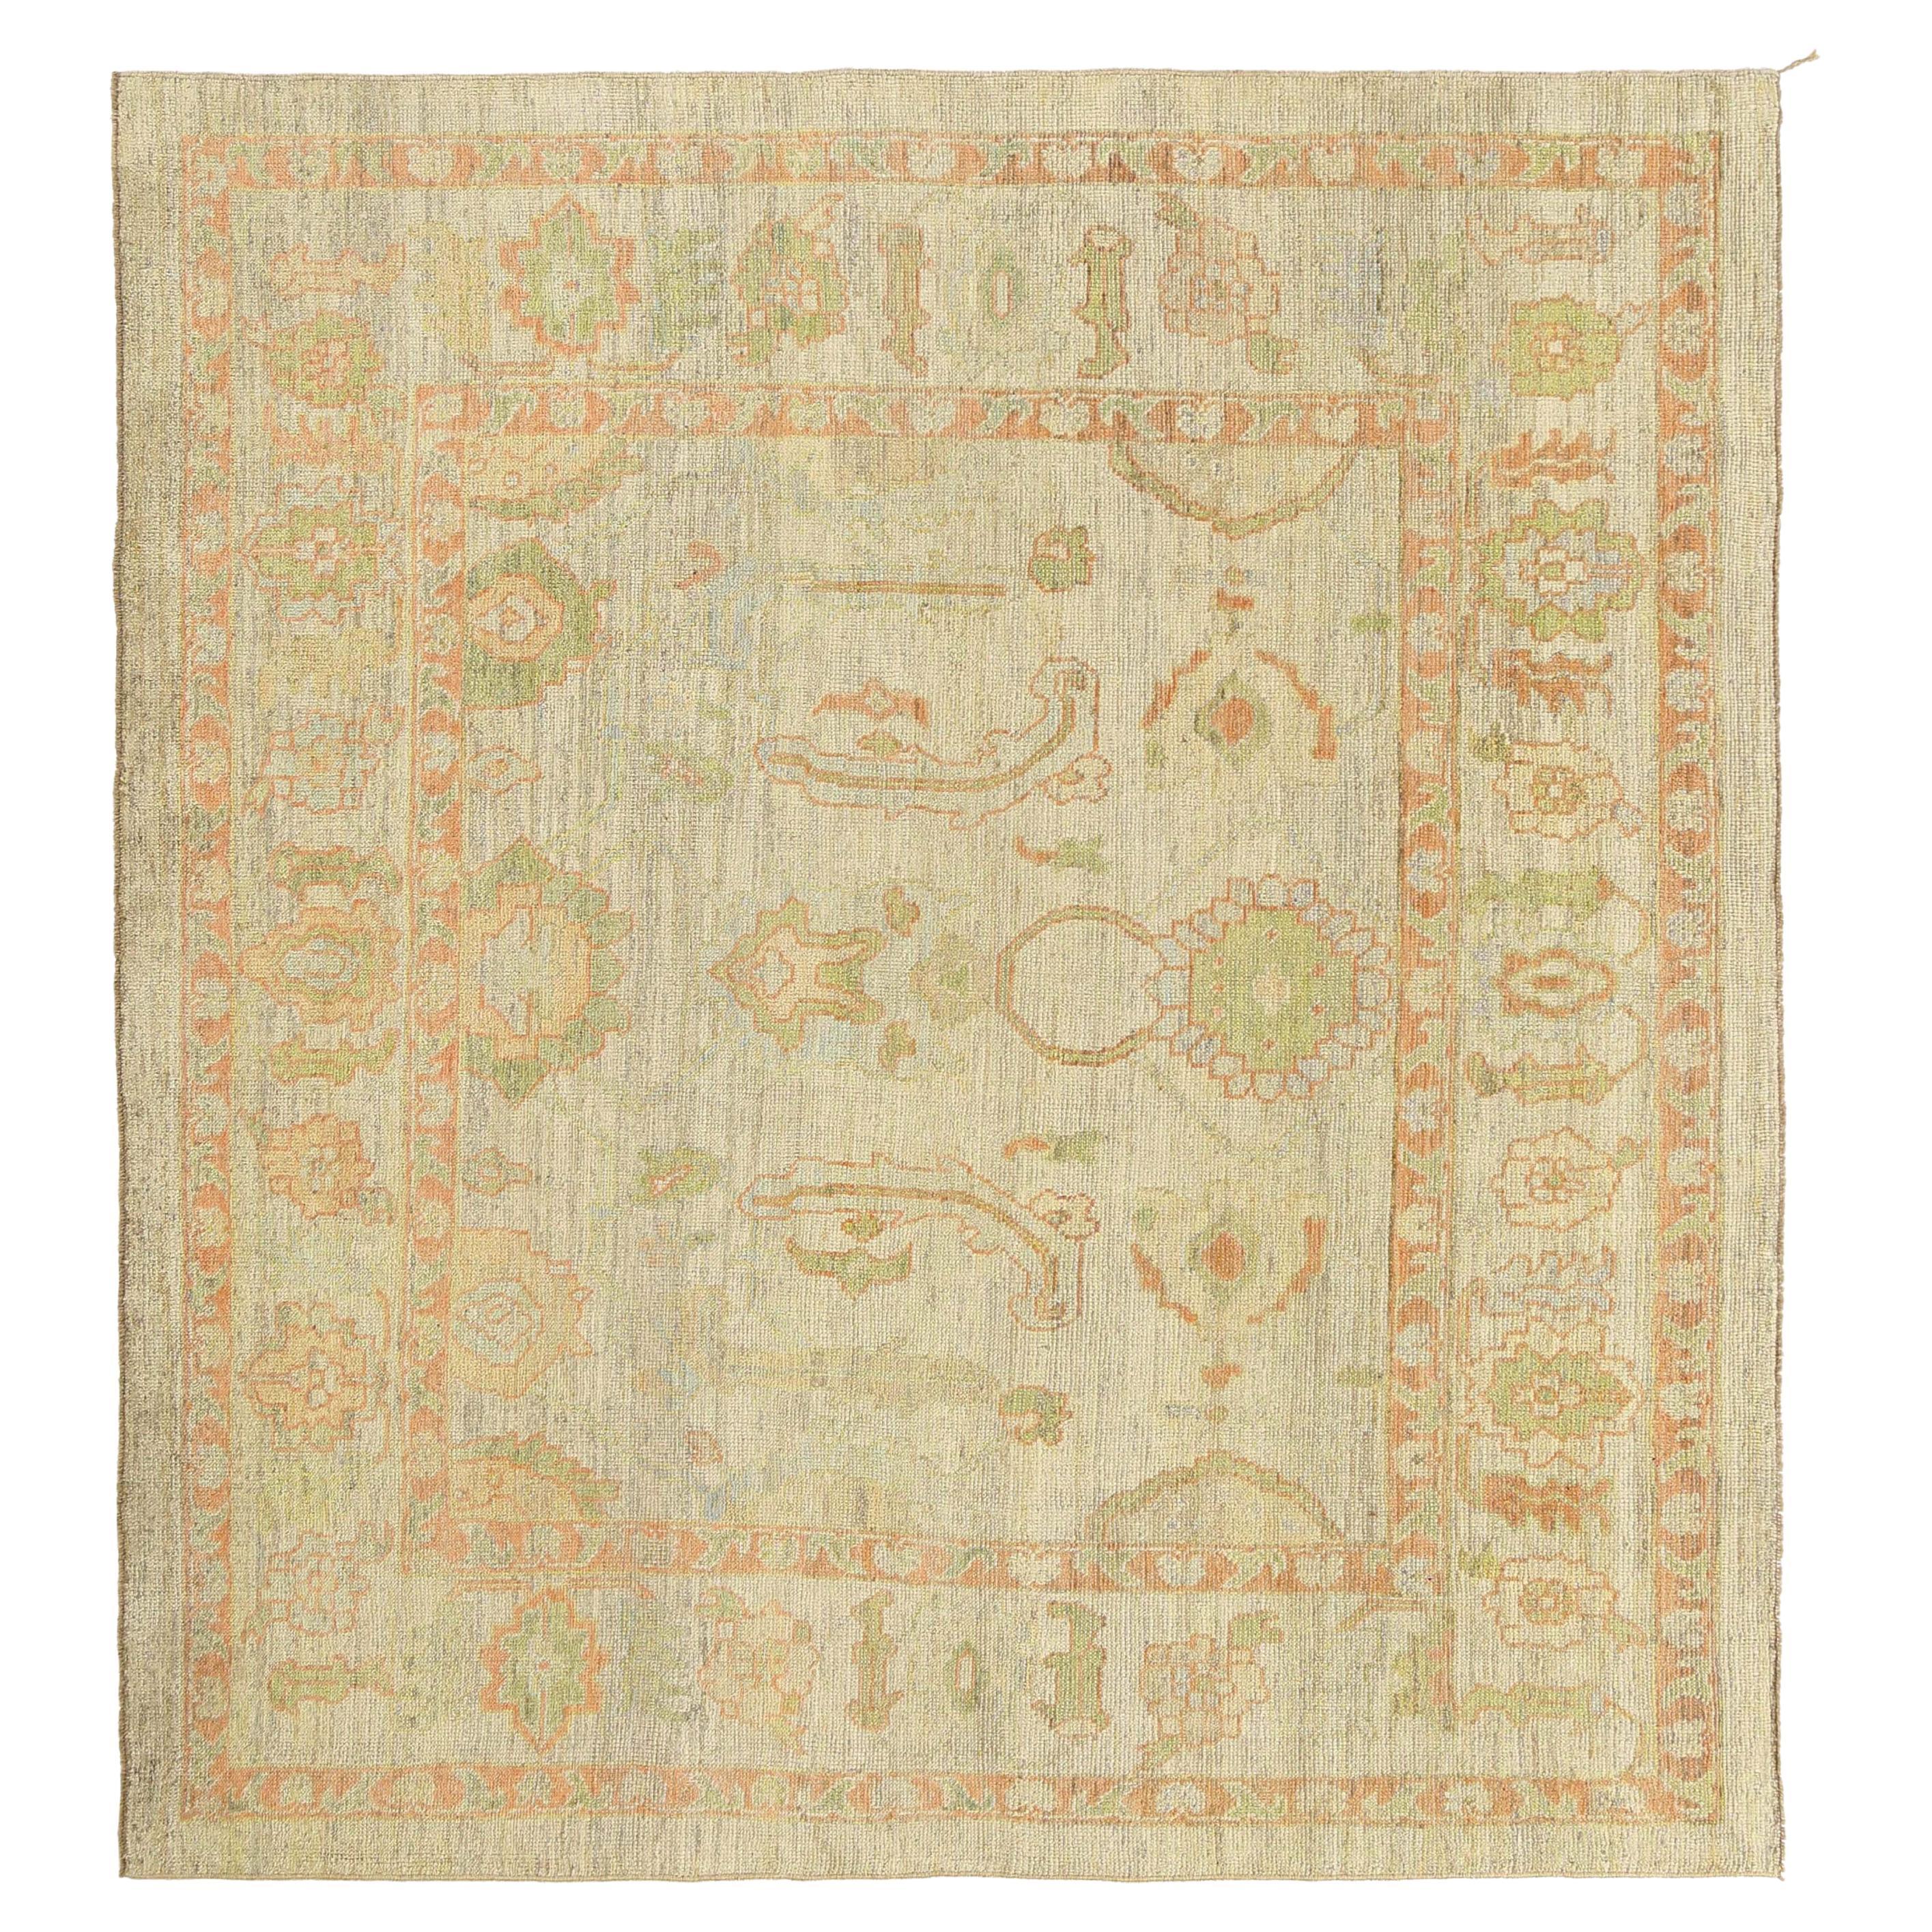 New Turkish Oushak Rug with Pastel Colors